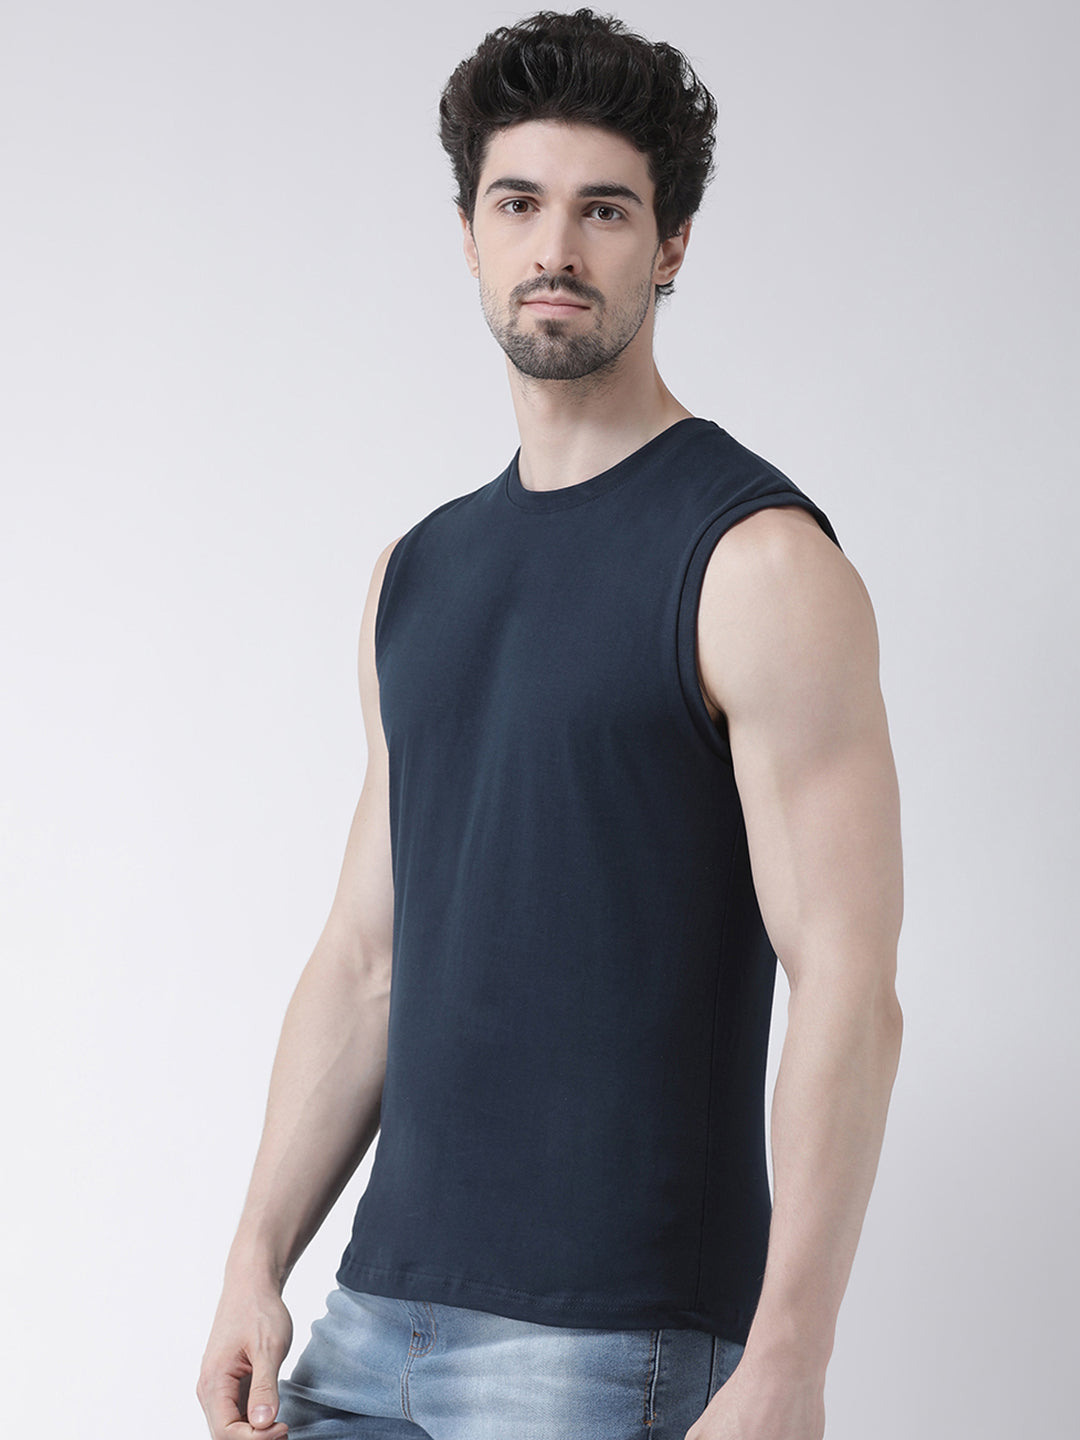 Friskers Solid Men Round Neck Sleeveless T-Shirt - Friskers